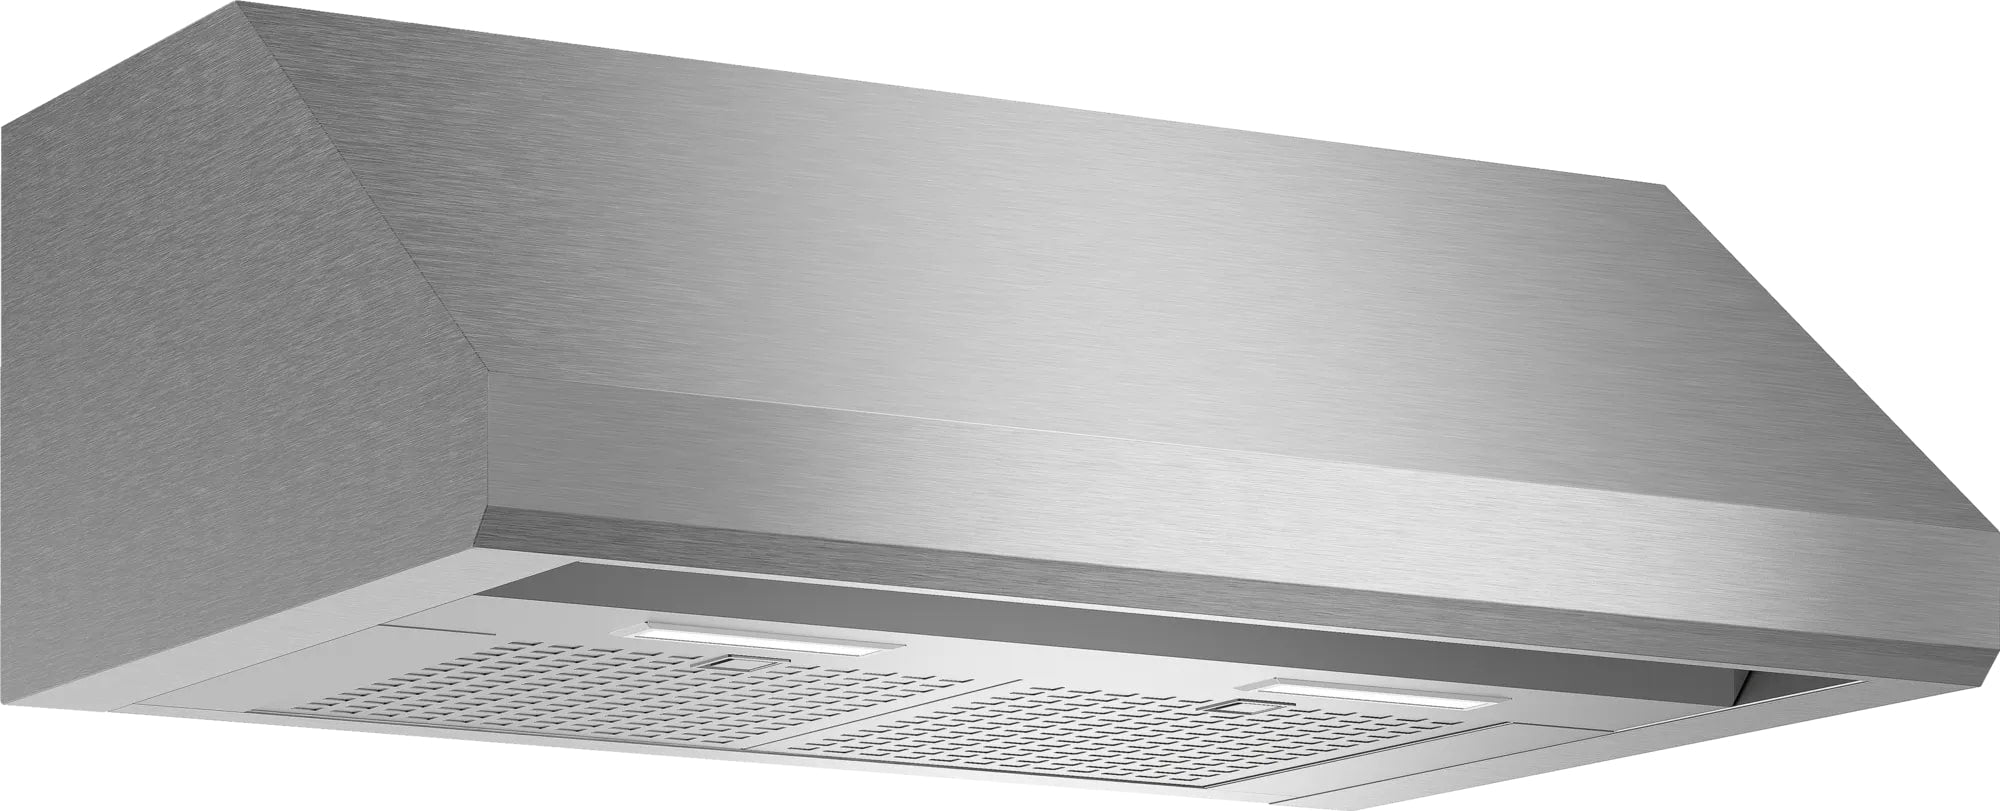 Thermador - 29.9375 Inch 600 CFM Under Cabinet Range Vent in Stainless - HMWB30WS